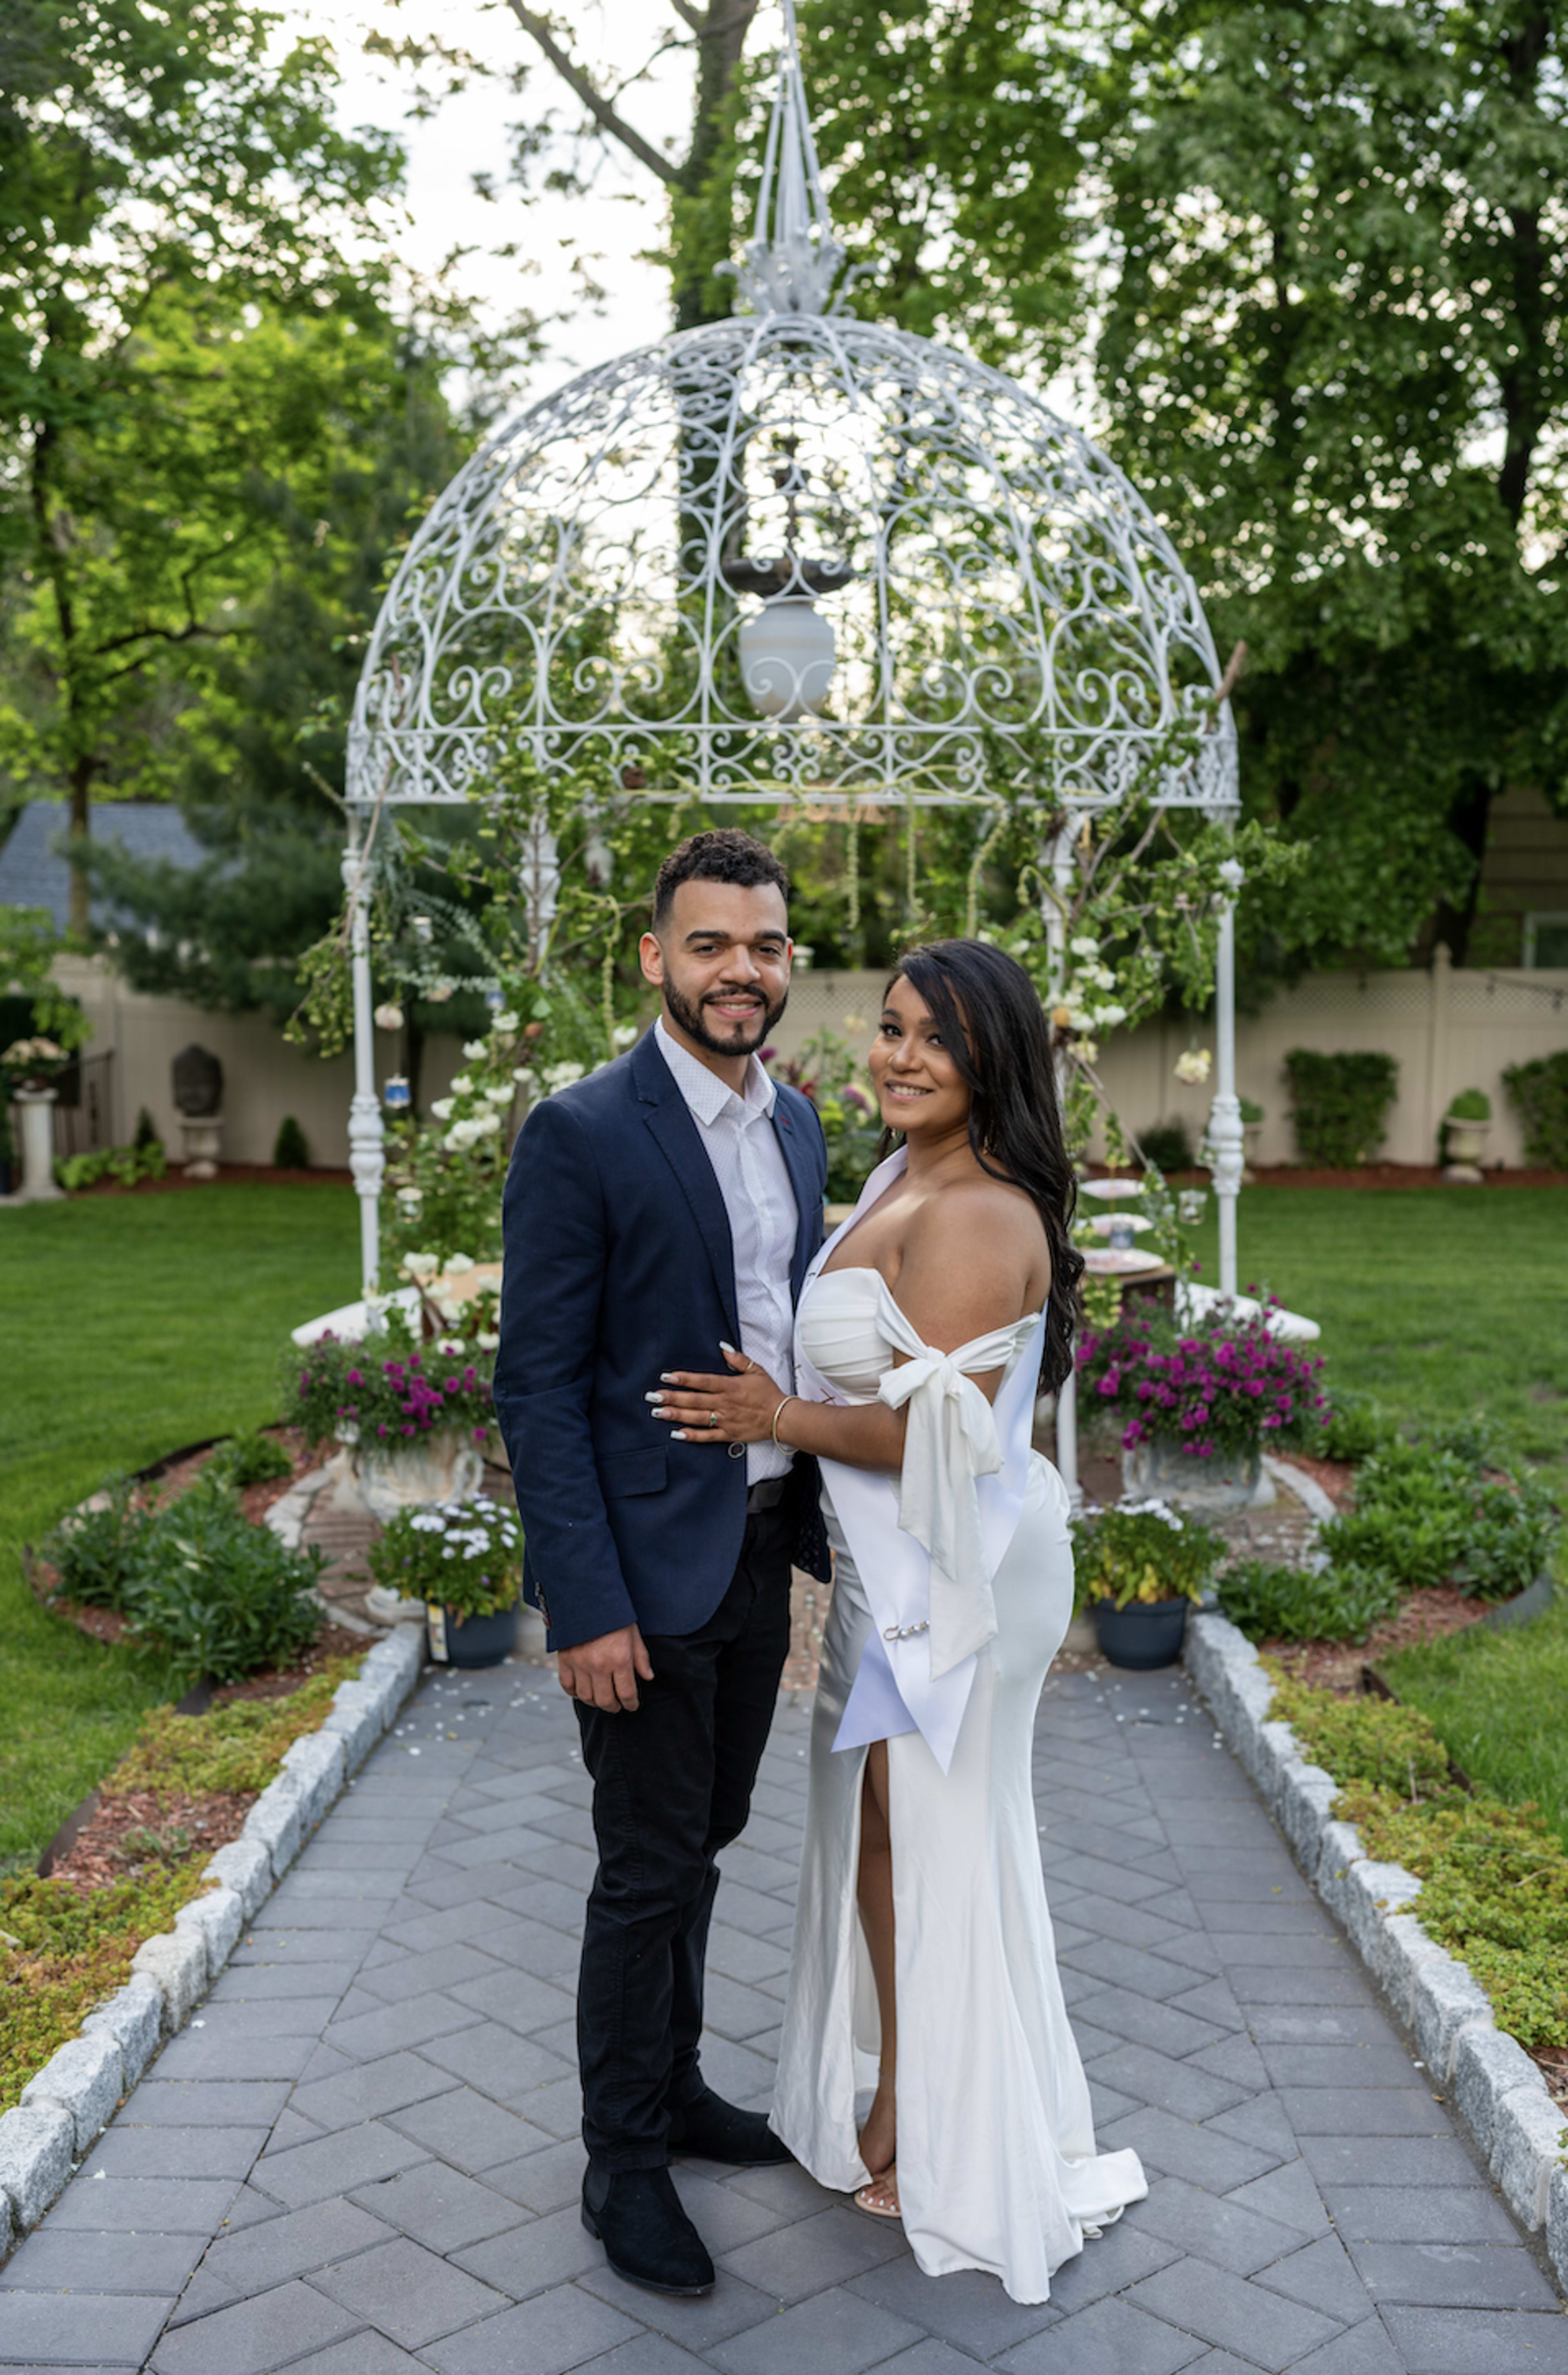 A couple posing for an outdoor photoshoot in front of a white gazebo.